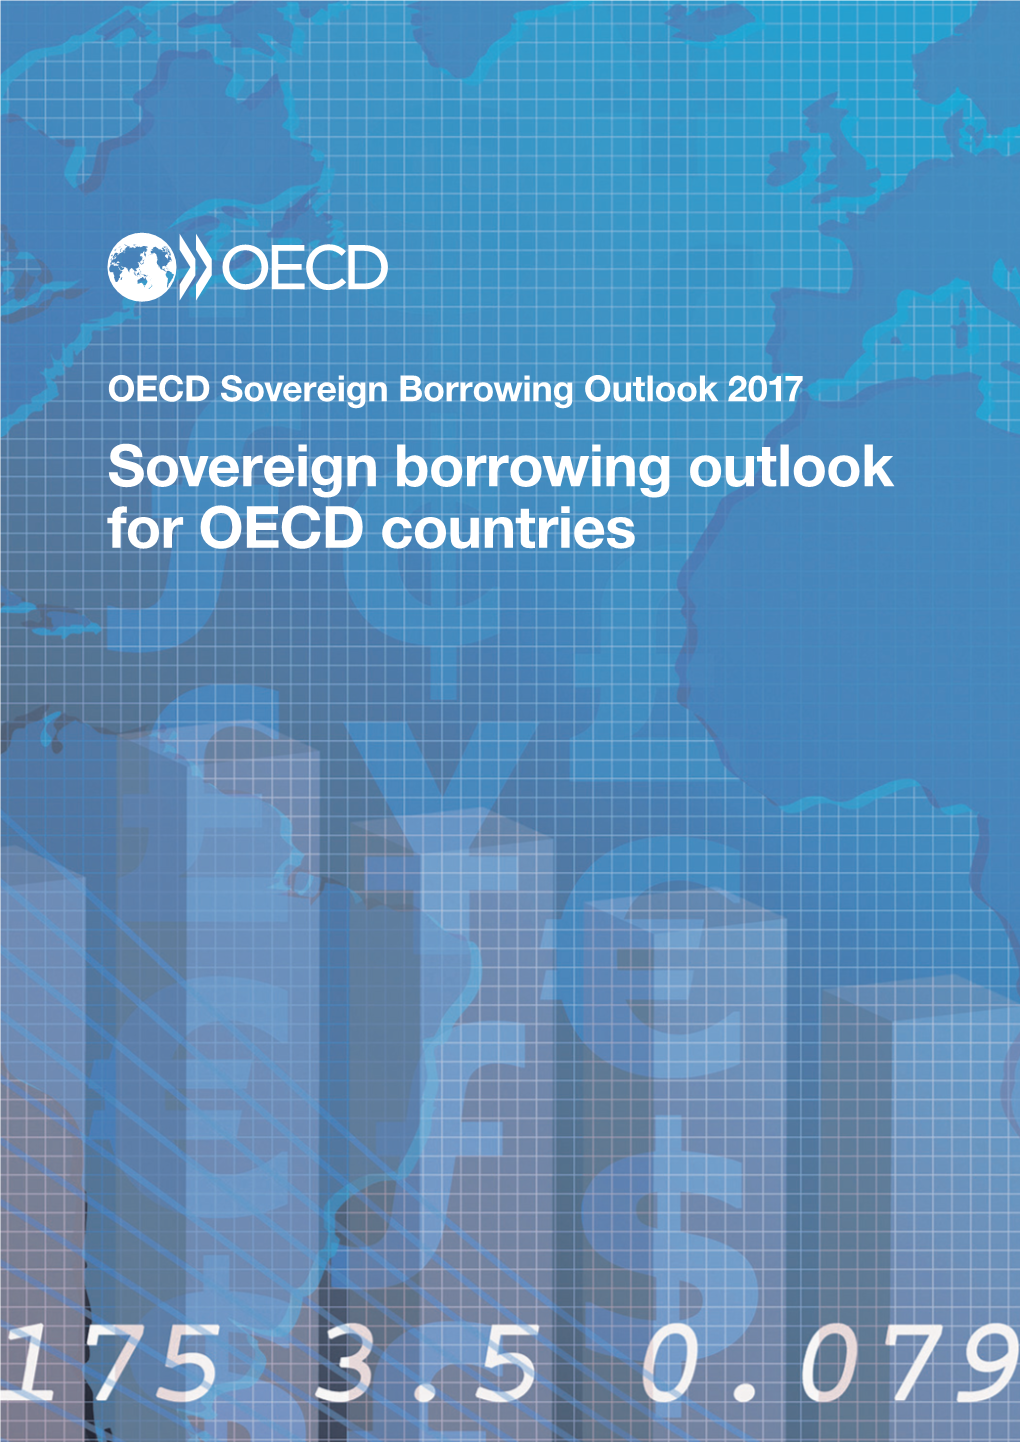 Sovereign Borrowing Outlook for OECD Countries